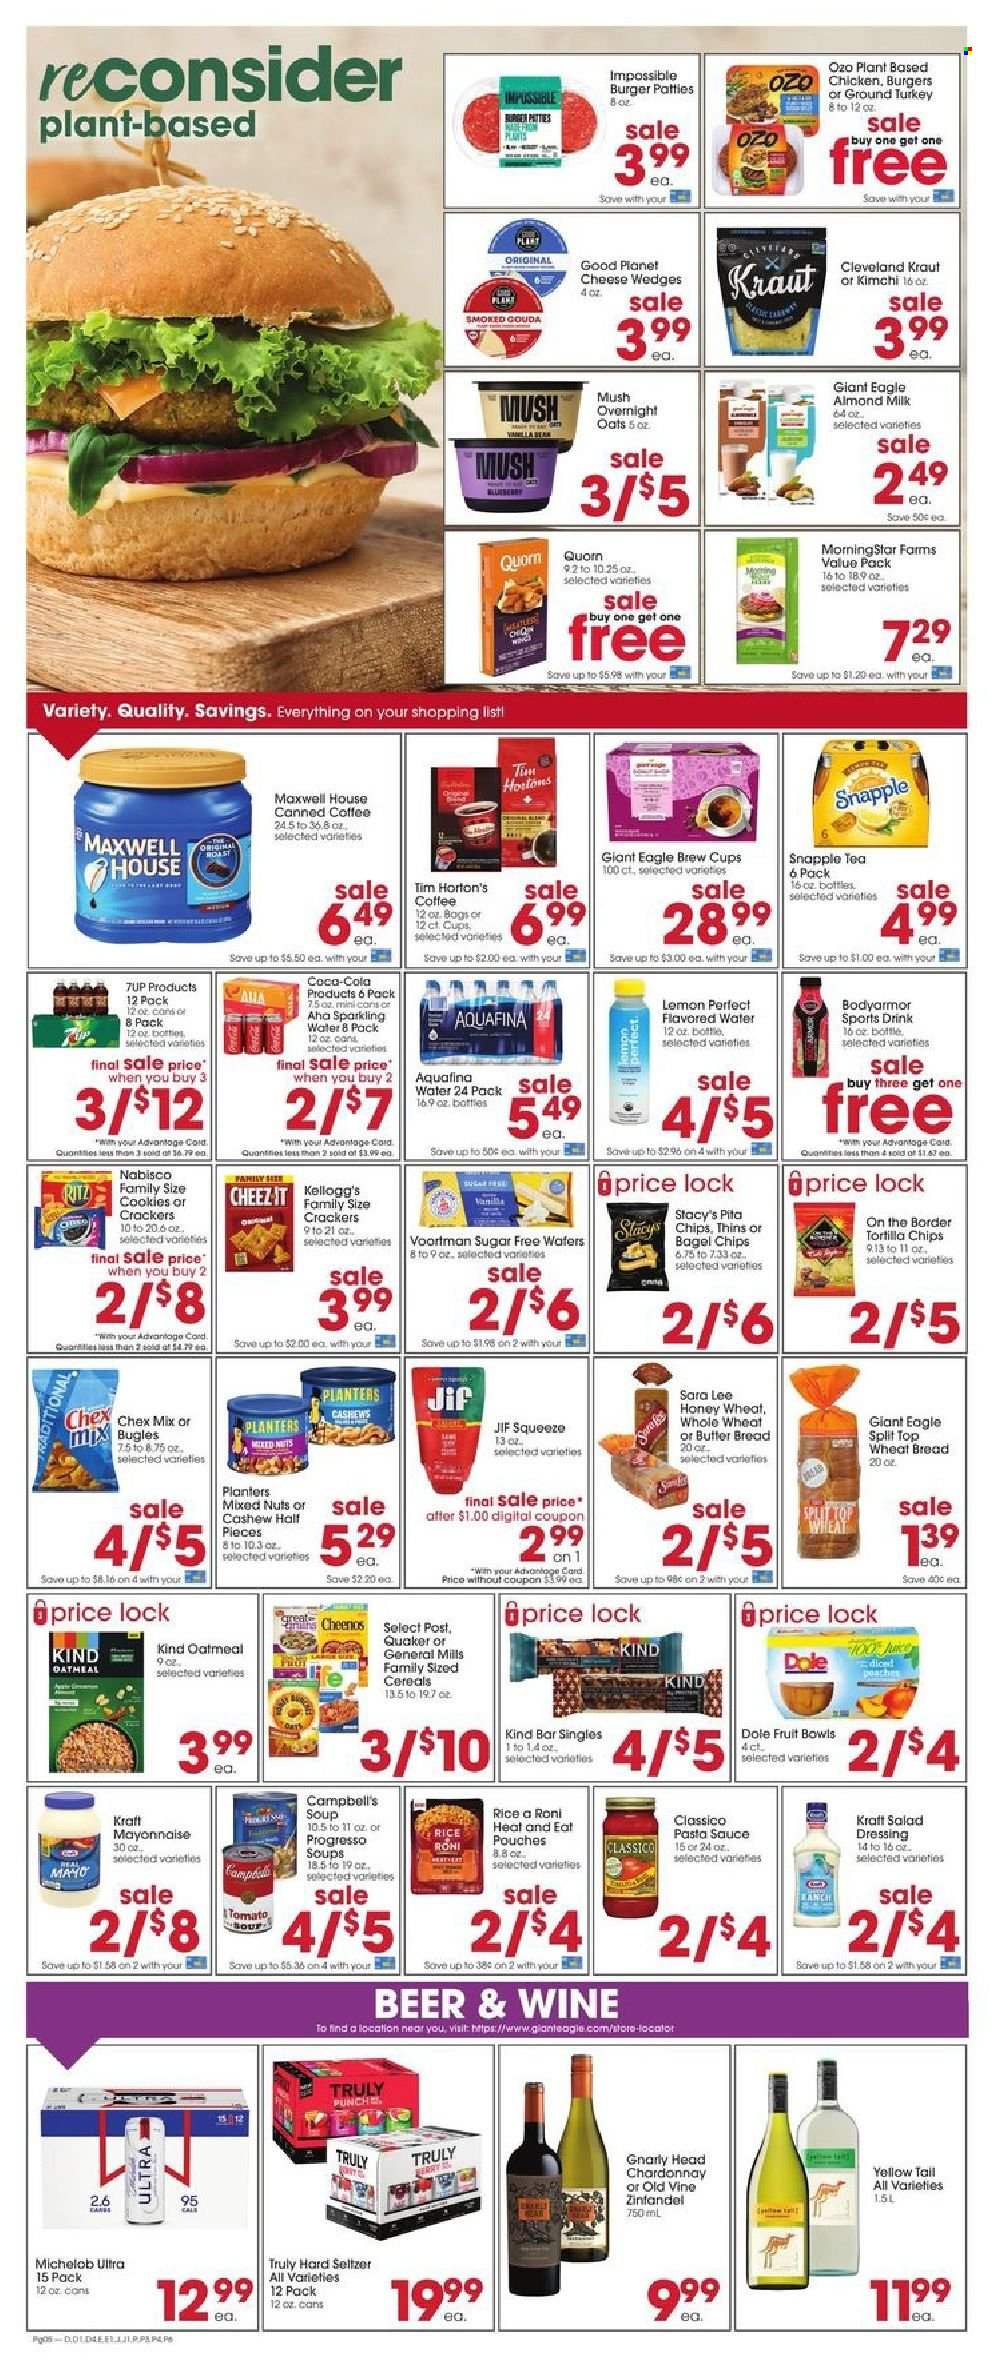 thumbnail - Giant Eagle Flyer - 01/06/2022 - 01/12/2022 - Sales products - bagels, wheat bread, Sara Lee, Dole, Campbell's, pasta sauce, soup, hamburger, sauce, Quaker, Progresso, MorningStar Farms, Kraft®, almond milk, mayonnaise, cookies, crackers, Kellogg's, RITZ, tortilla chips, chips, Thins, Chex Mix, cereals, rice, salad dressing, dressing, Classico, Jif, cashews, mixed nuts, Planters, Coca-Cola, 7UP, Snapple, Aquafina, flavored water, sparkling water, Maxwell House, tea, coffee, white wine, Chardonnay, punch, Hard Seltzer, TRULY, beer, ground turkey, burger patties, cup, Michelob. Page 4.